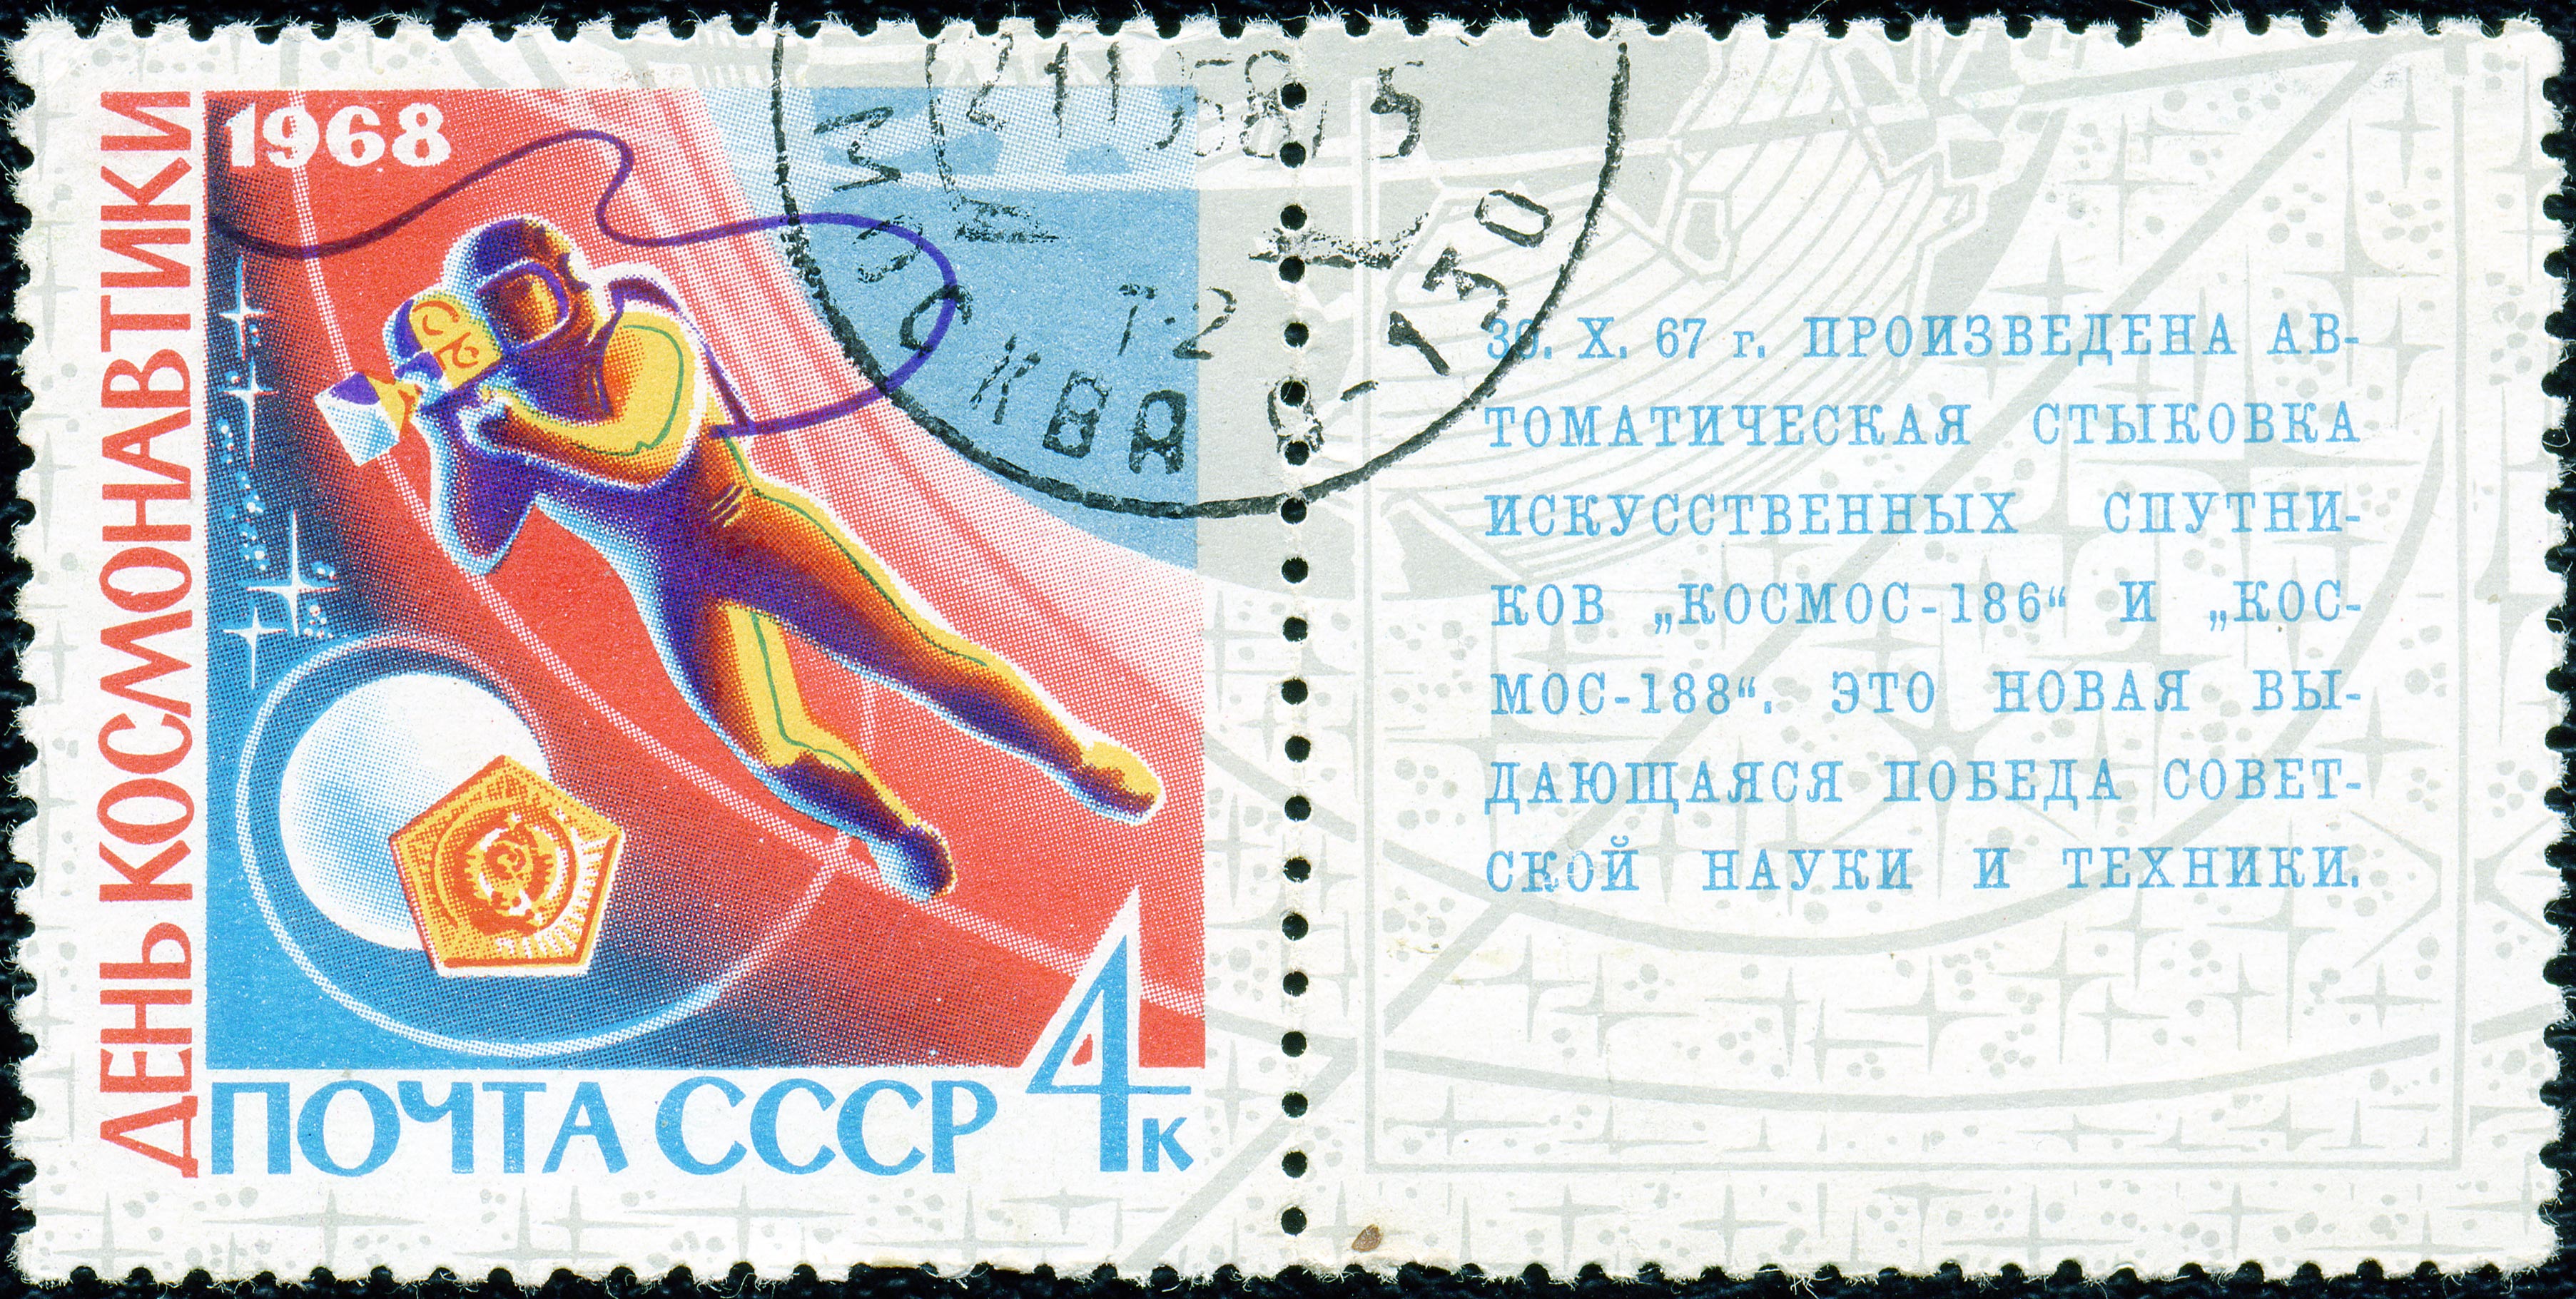 The Soviet Union 1968 CPA 3621 stamp with label for 3622 (Leonov Filming in Space and Fragment of Emblem Dropped on Moon by 'Luna 2') cancelled